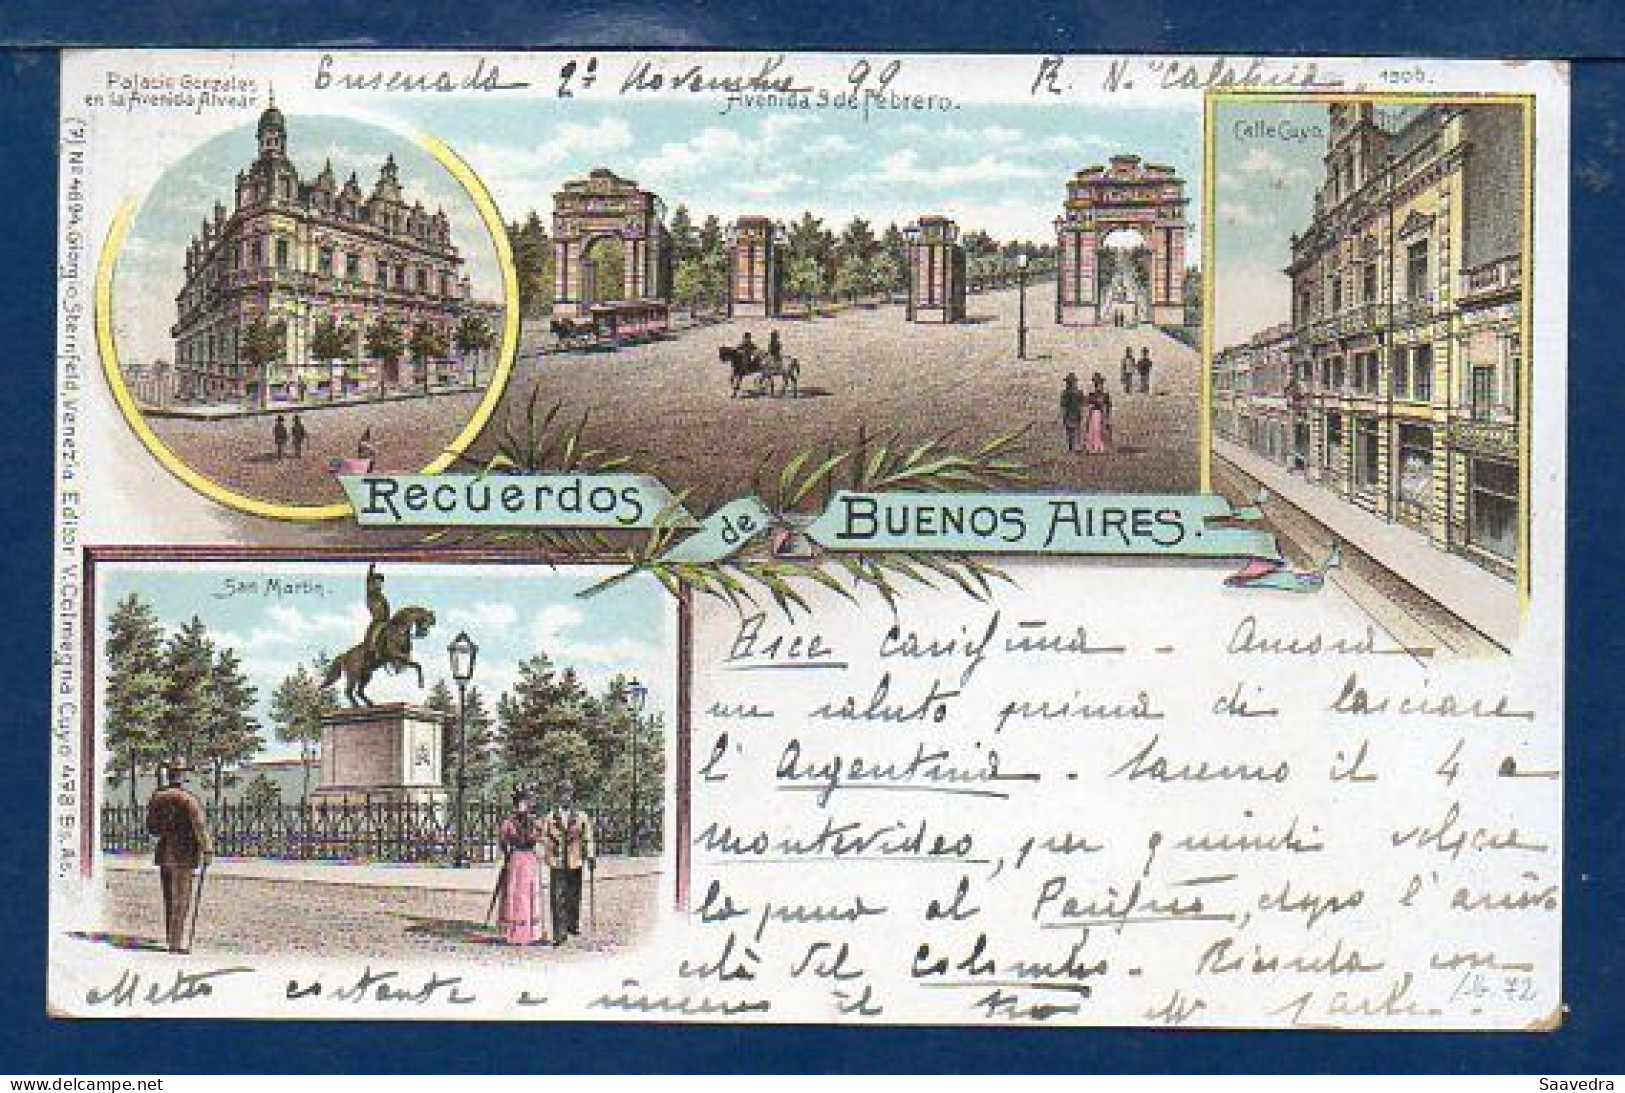 Argentina To Italy, "Gruss From Buenos Aires", 1899, Used Litho Postcard  (033) - Saluti Da.../ Gruss Aus...